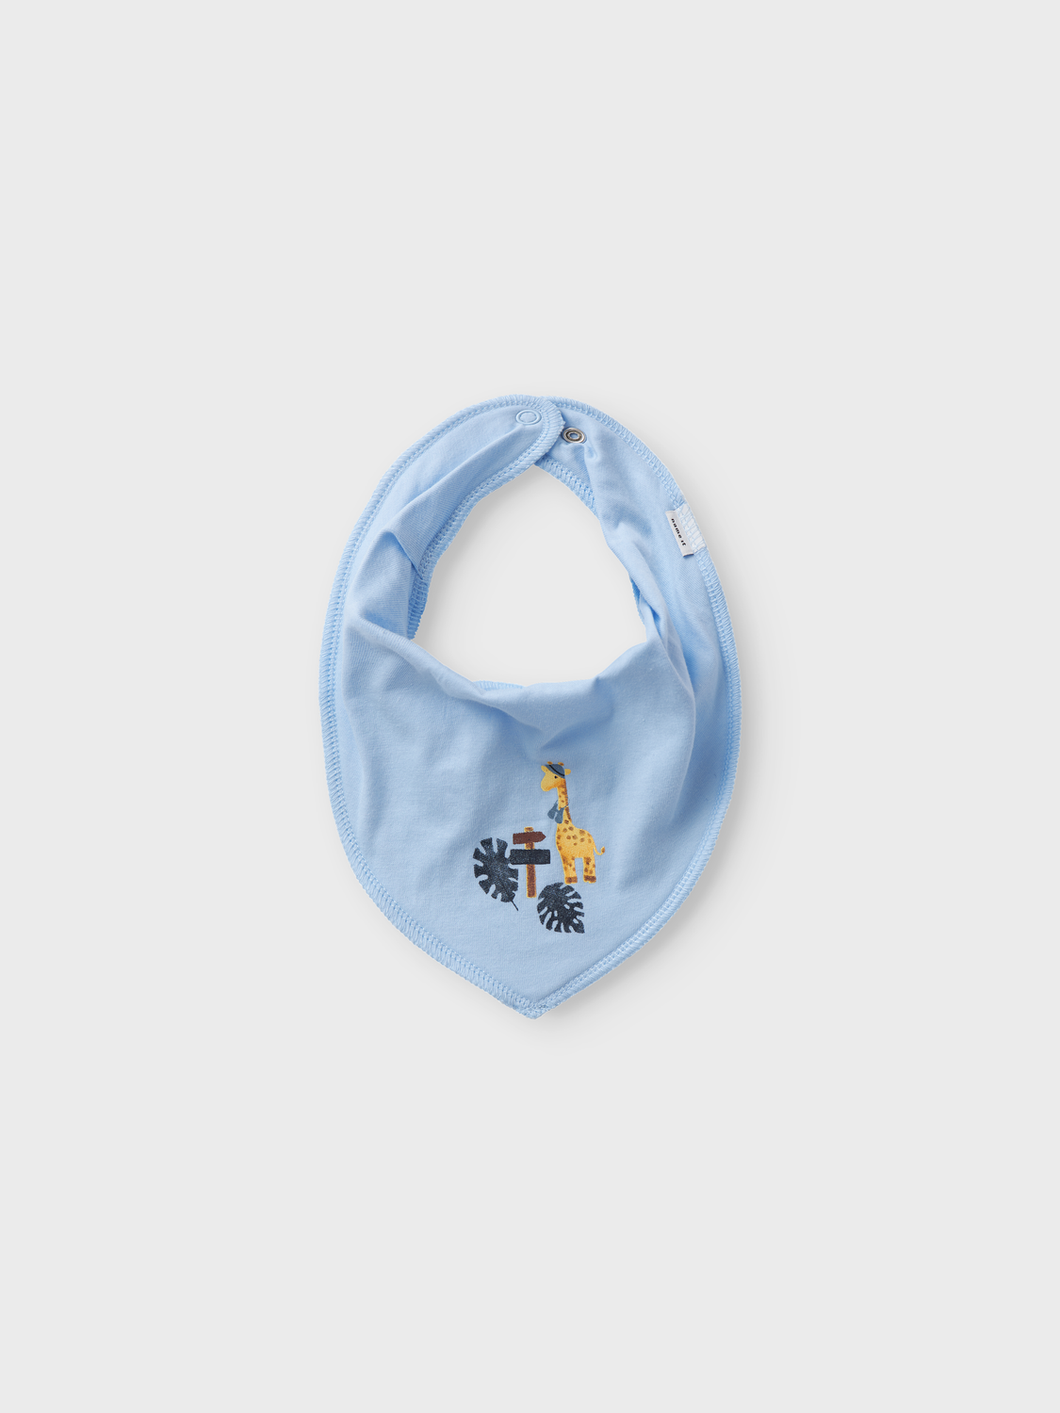 NBMYASIMHICO Scarves - Chambray Blue